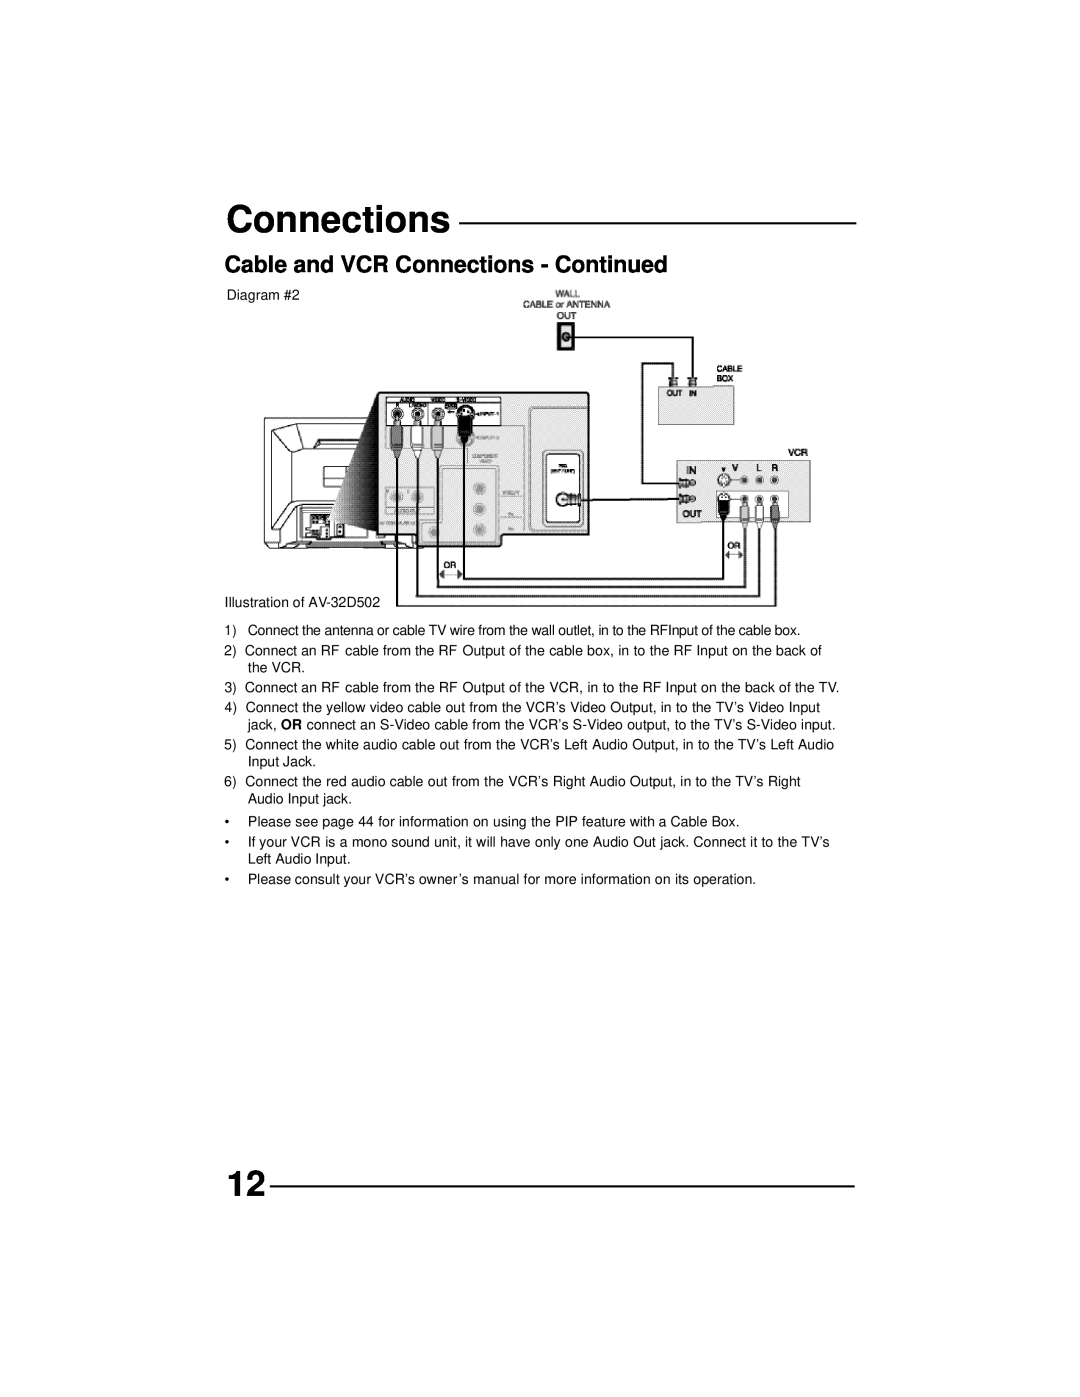 JVC AV 27D502, AV 36D202, AV 36D502, AV 36D302, AV 32D302, AV 32D502, AV 32D202 manual Cable and VCR Connections - Continued 